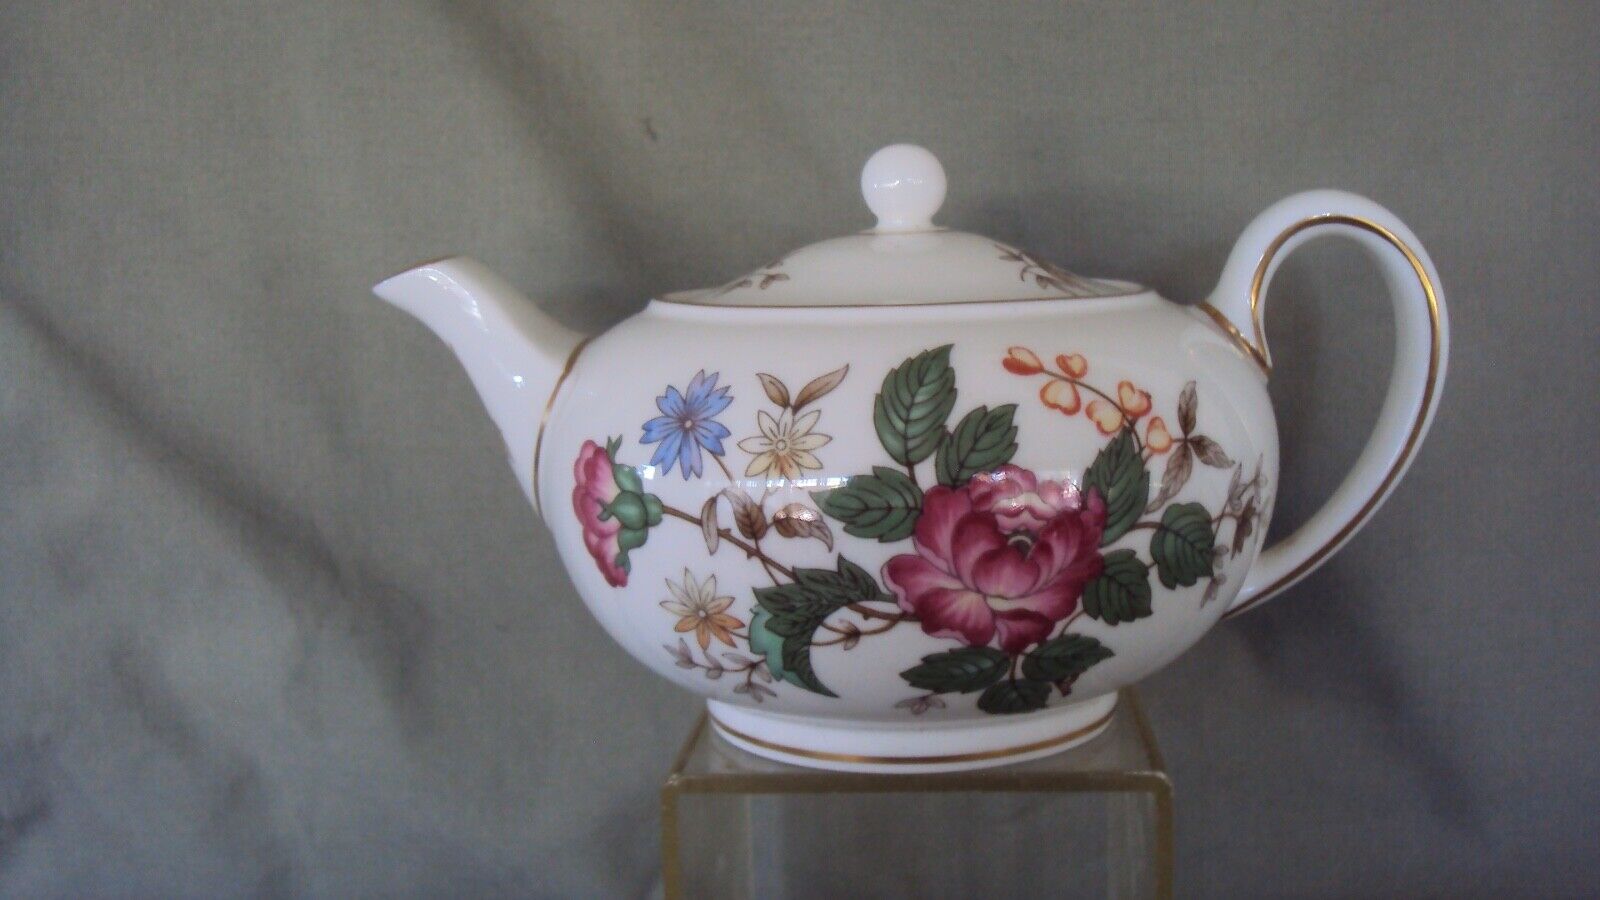 Wedgwood 'Charnwood' 2 CUP TEAPOT Bone China Made in England #3984 FLORAL